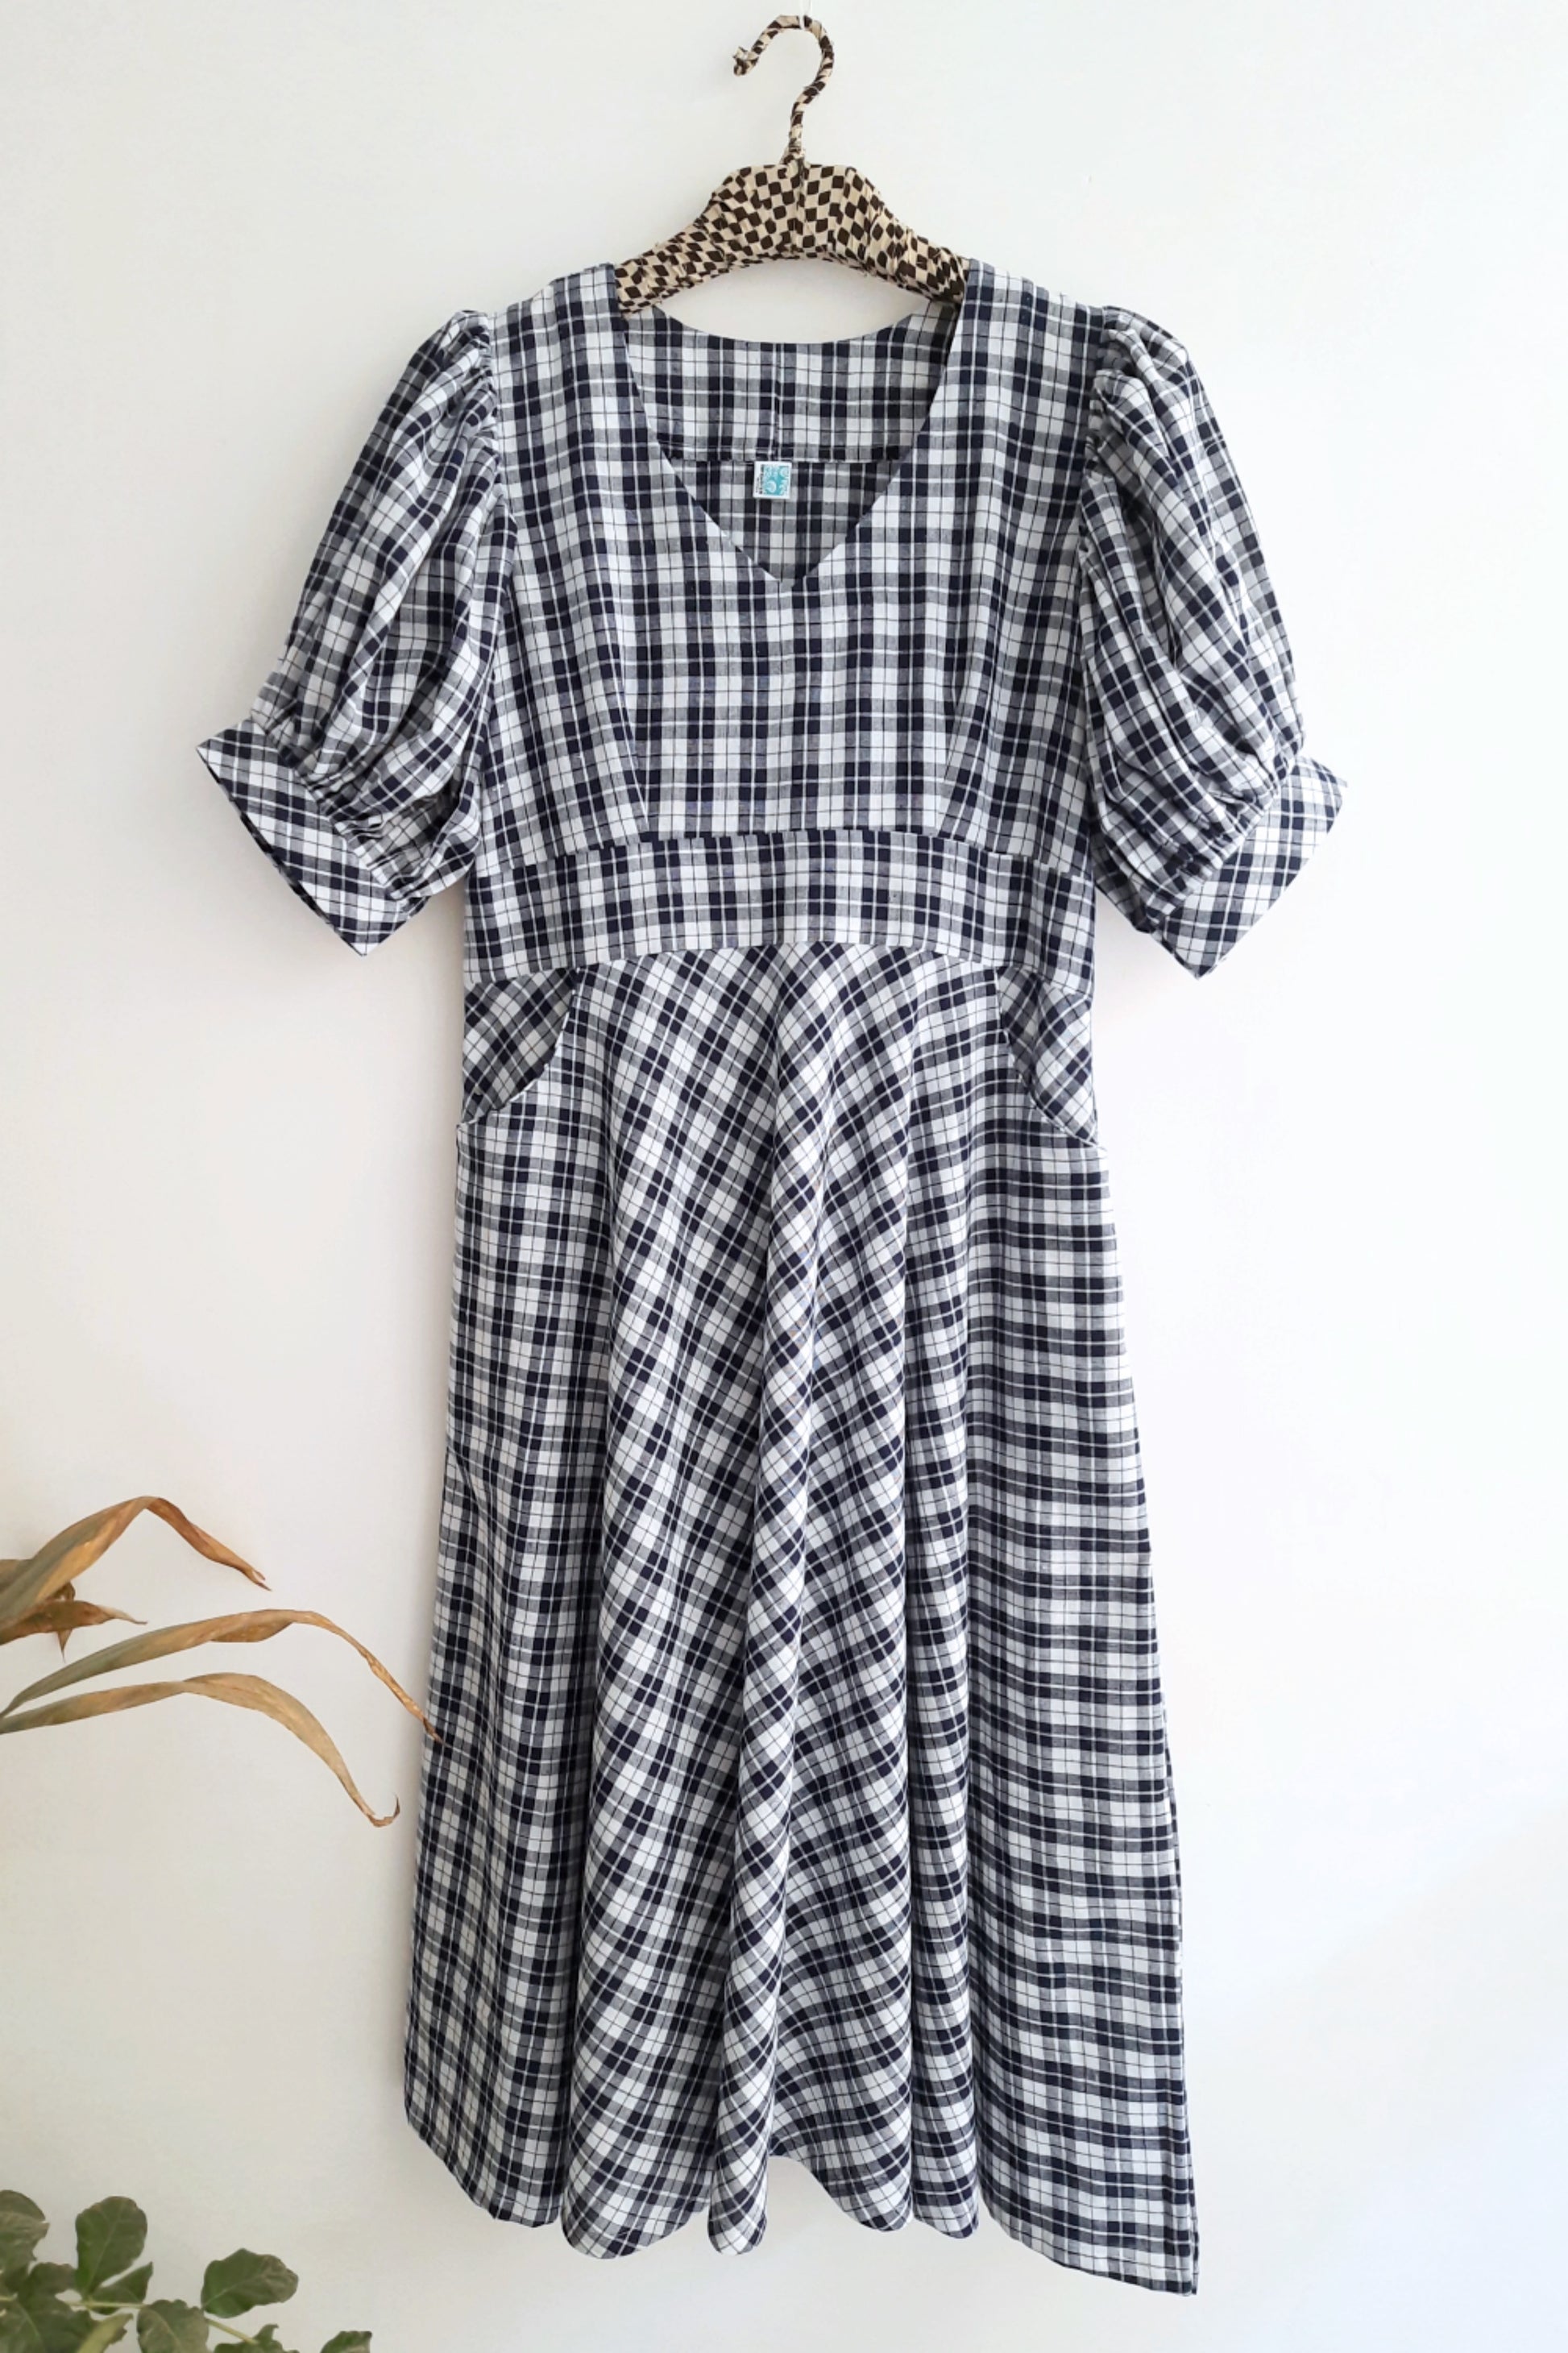 Checkered Dress in Blue & White color for women with V-neck, puffy sleeves, and front pockets, made from sustainable cotton.